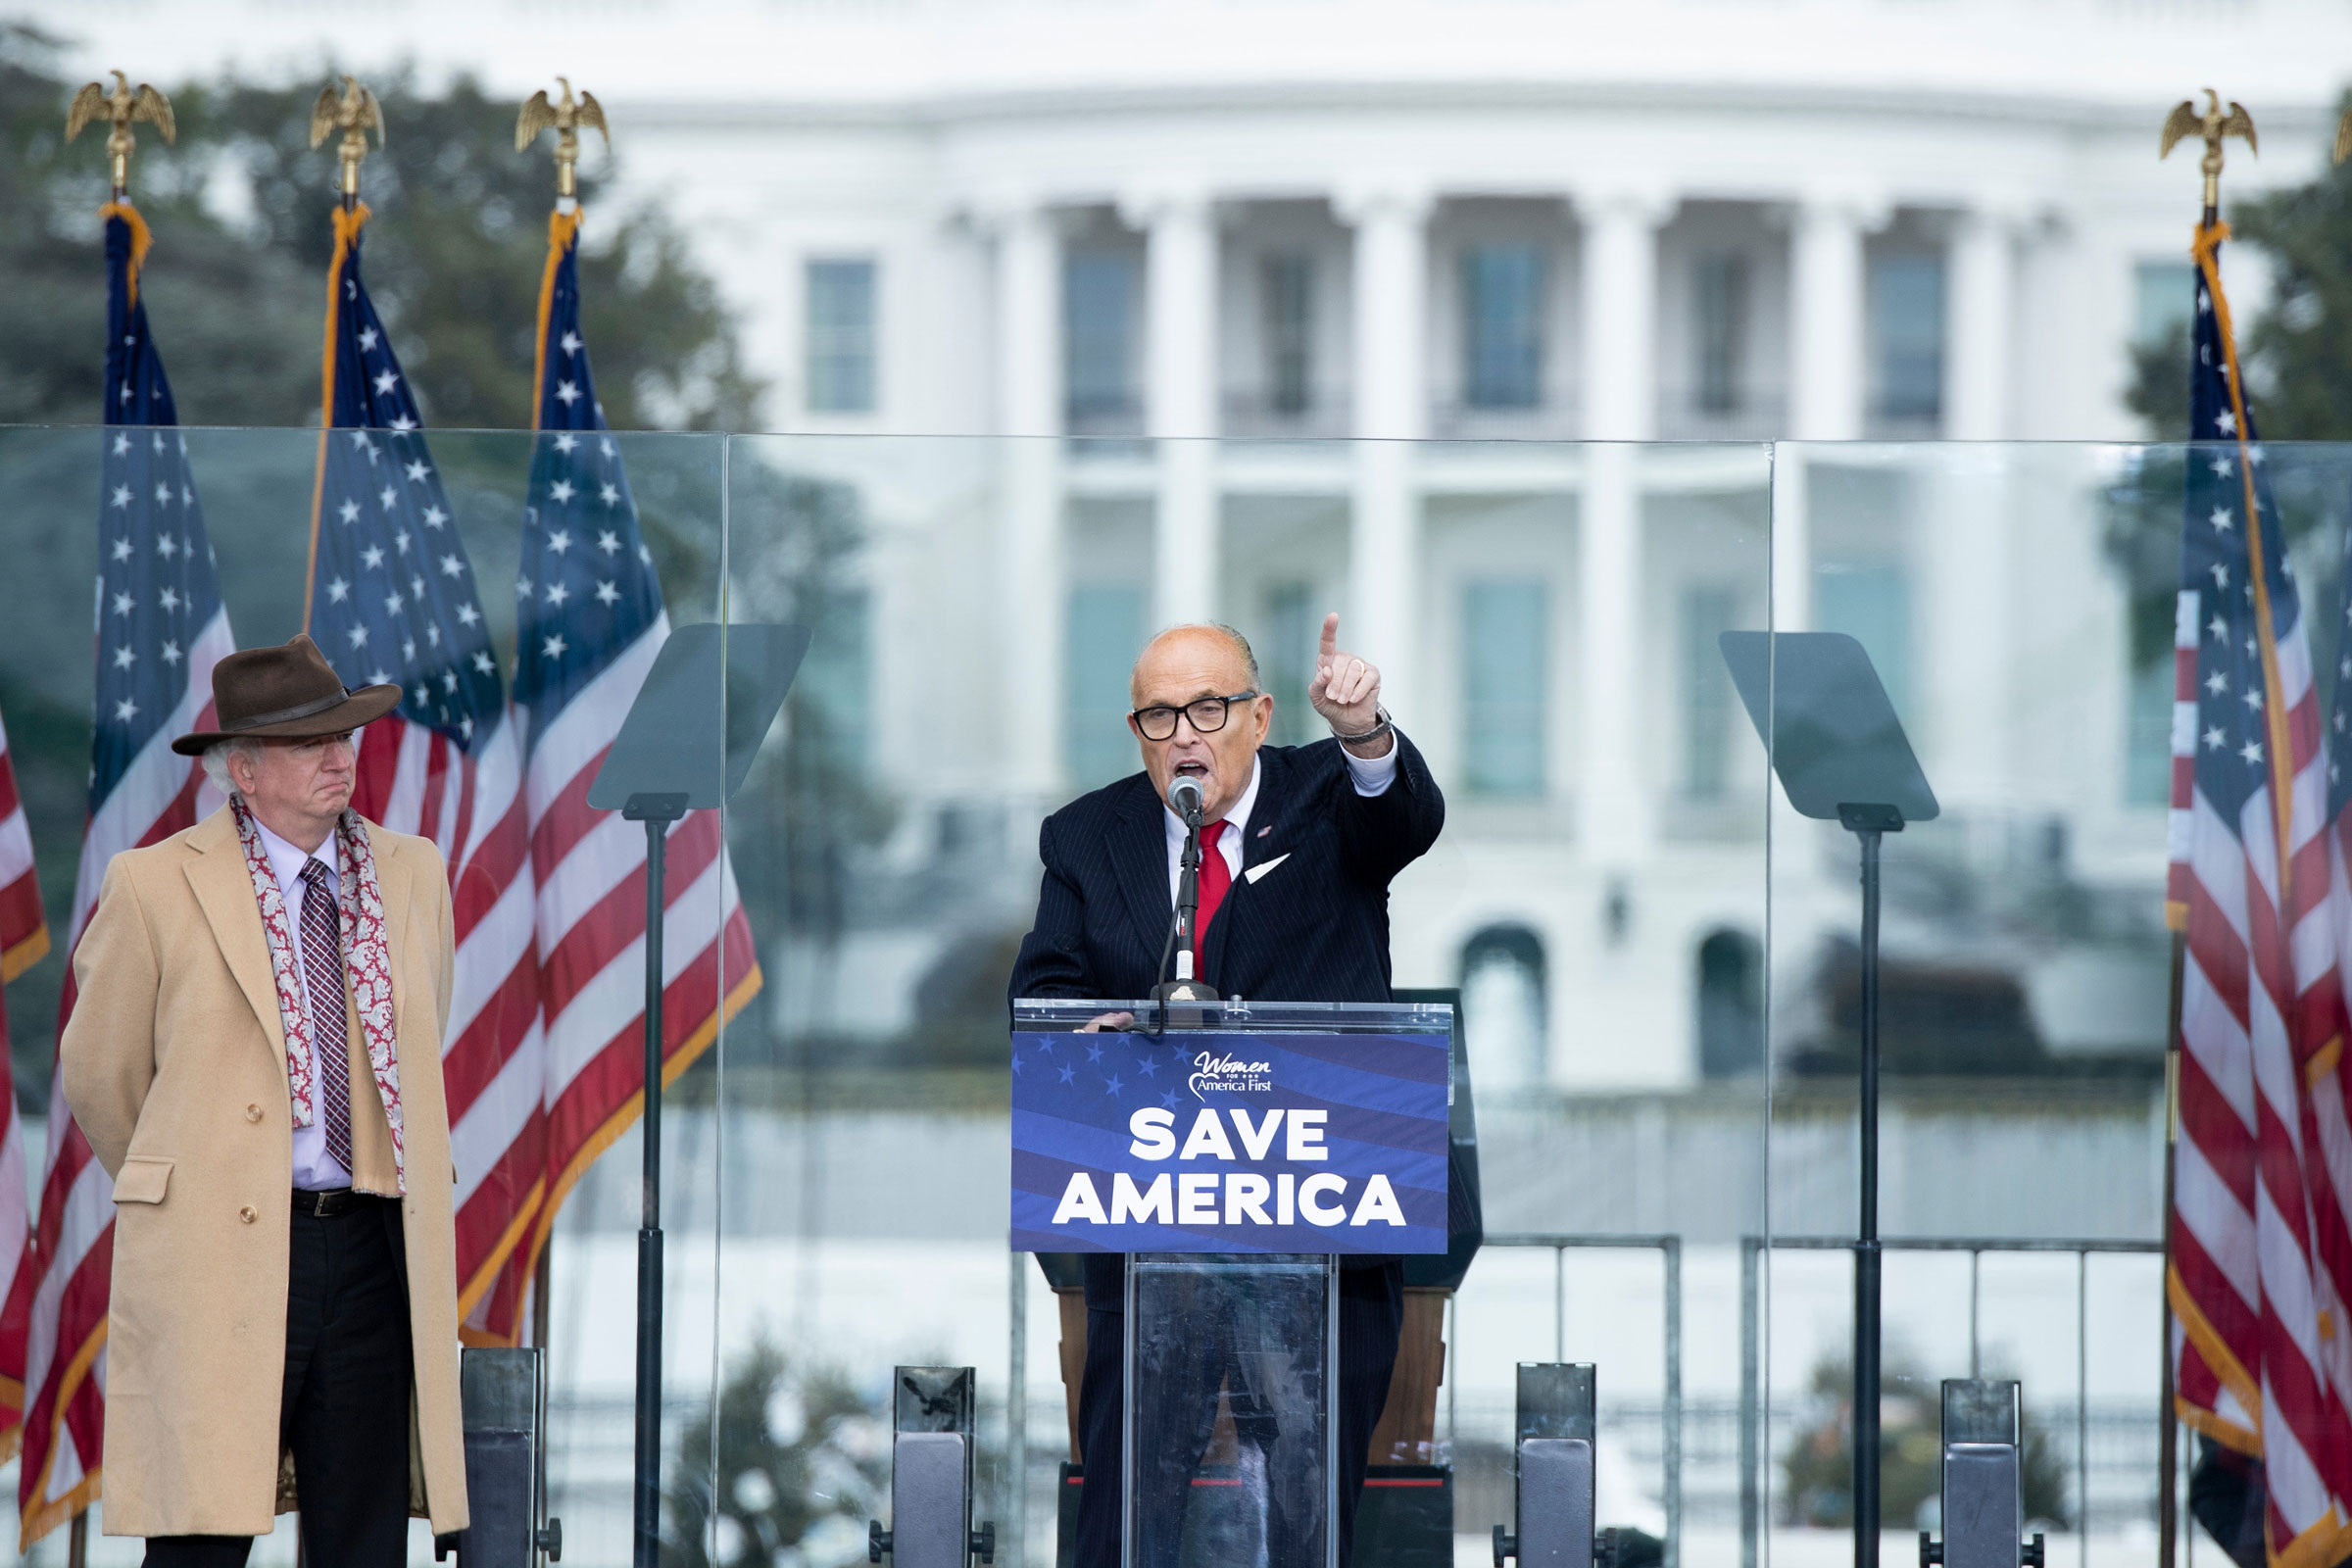 President Donald Trump's personal lawyer Rudy Giuliani speaks to supporters from The Ellipse near the White House, in Washington, D.C. on January 6, 2021. (Brendan Smialowski—APF/Getty Images)